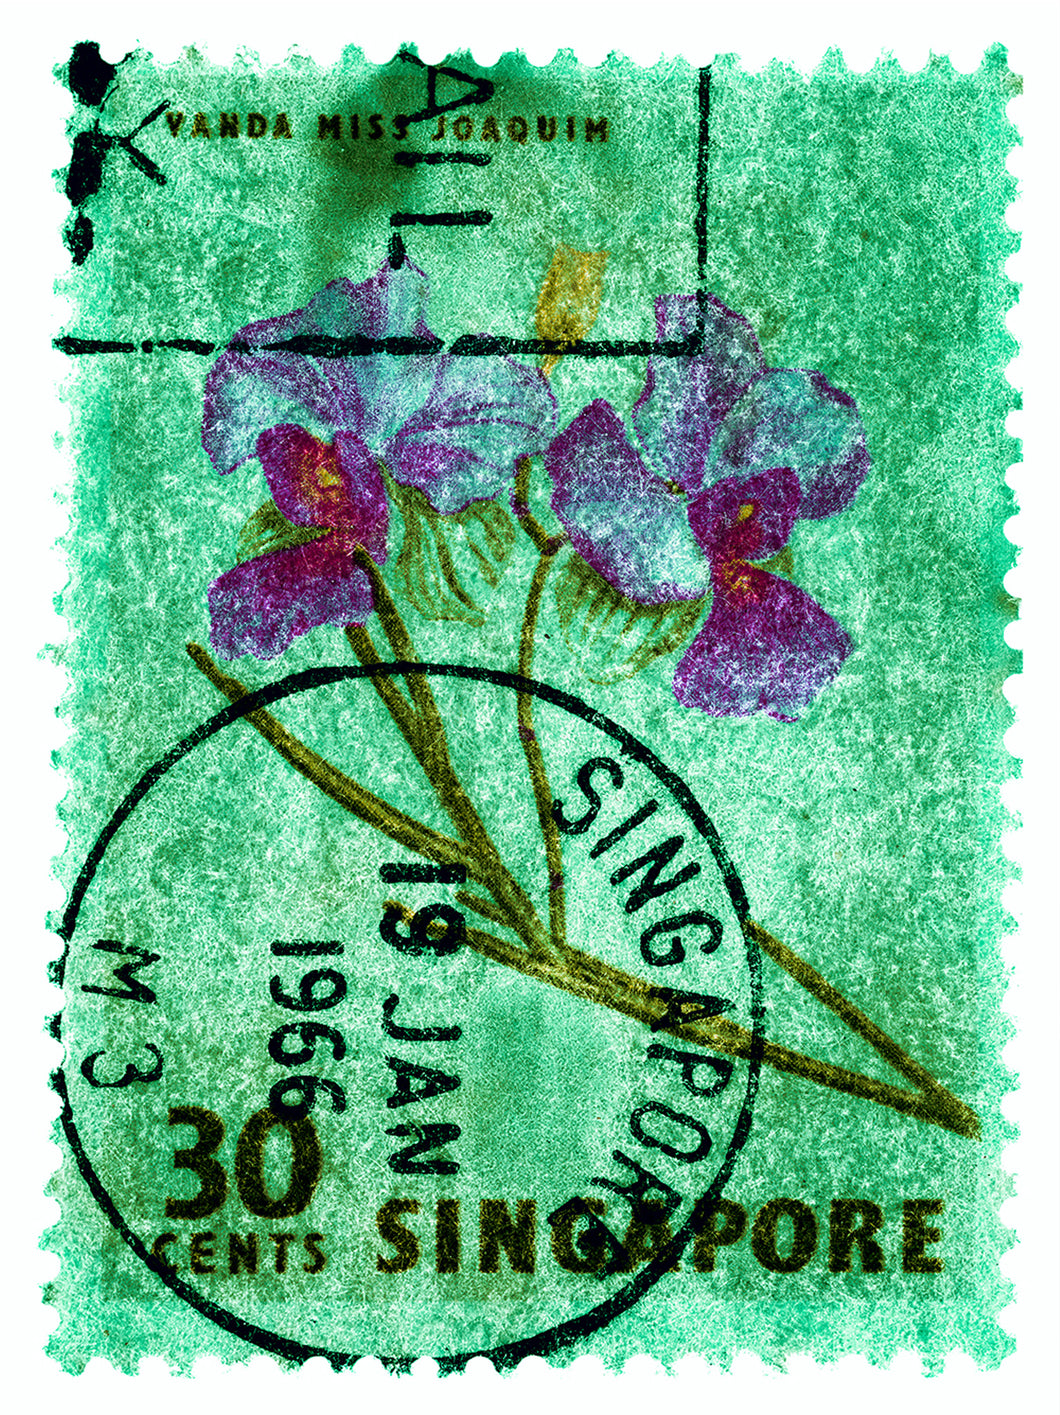 30 Cents Singapore Orchid Green. These historic postage stamps that make up the Heidler & Heeps Stamp Collection, Singapore Series “Postcards from Afar” have been given a twenty-first century pop art lease of life. The fine detailed tapestry of the original small postage stamp has been brought to life, made unique by the franking stamp and Heidler & Heeps specialist darkroom process.